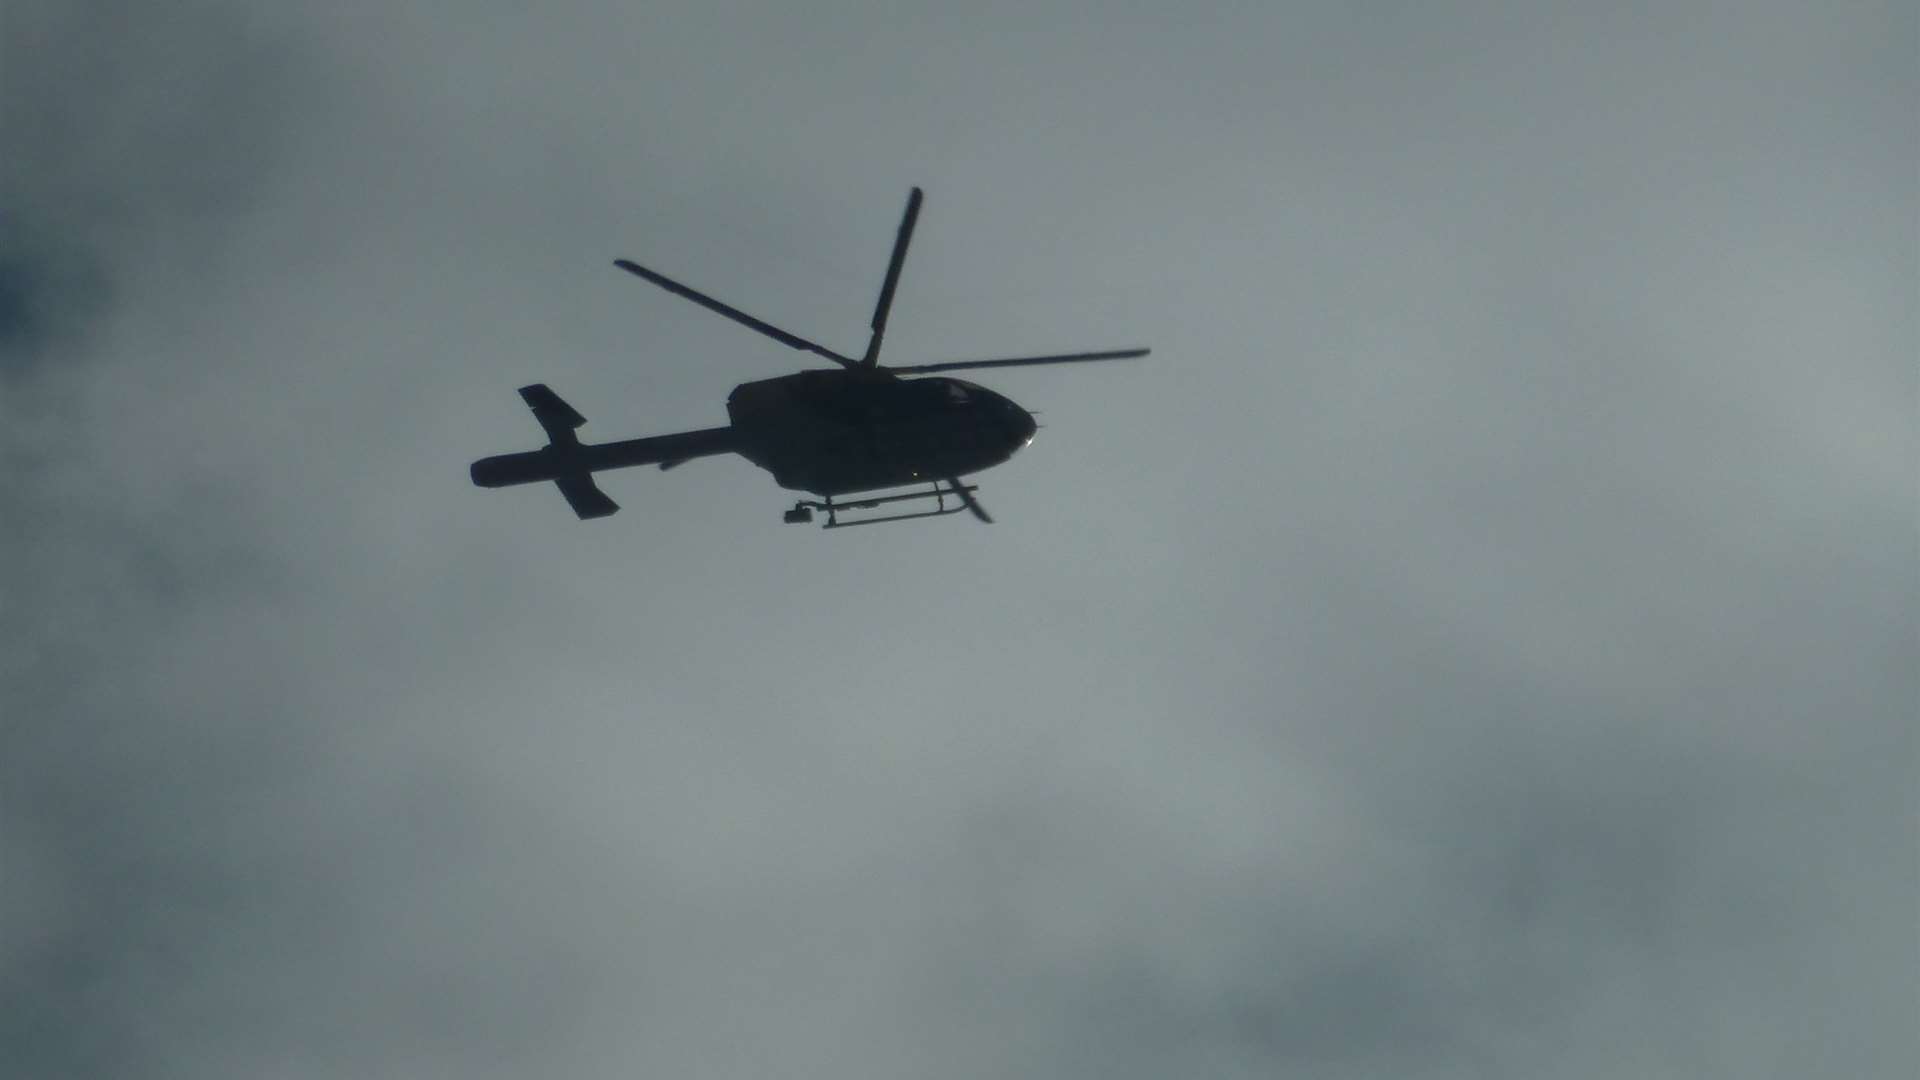 The helicopter spotted over Ashford town centre